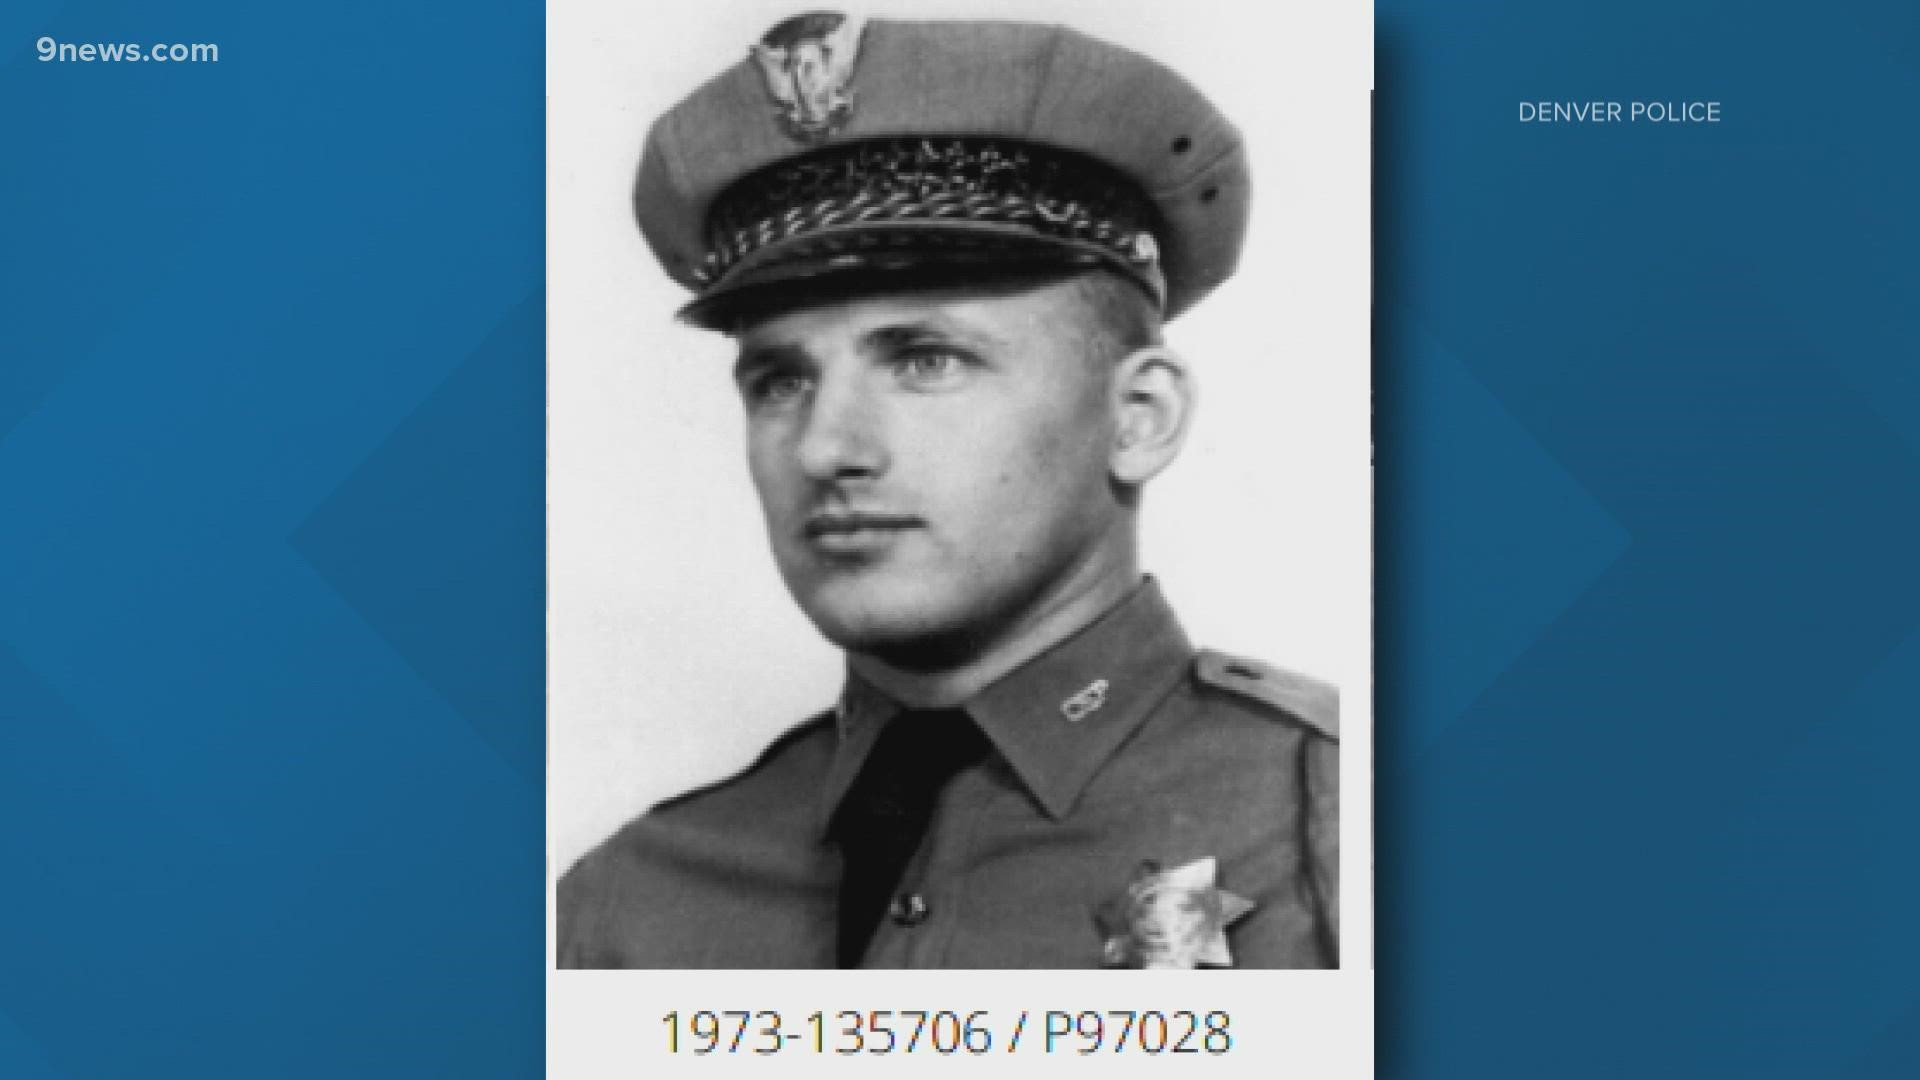 On December 27th, 1973, CSP says Trooper Carpenter was shot in his patrol car in the Montbello neighborhood.